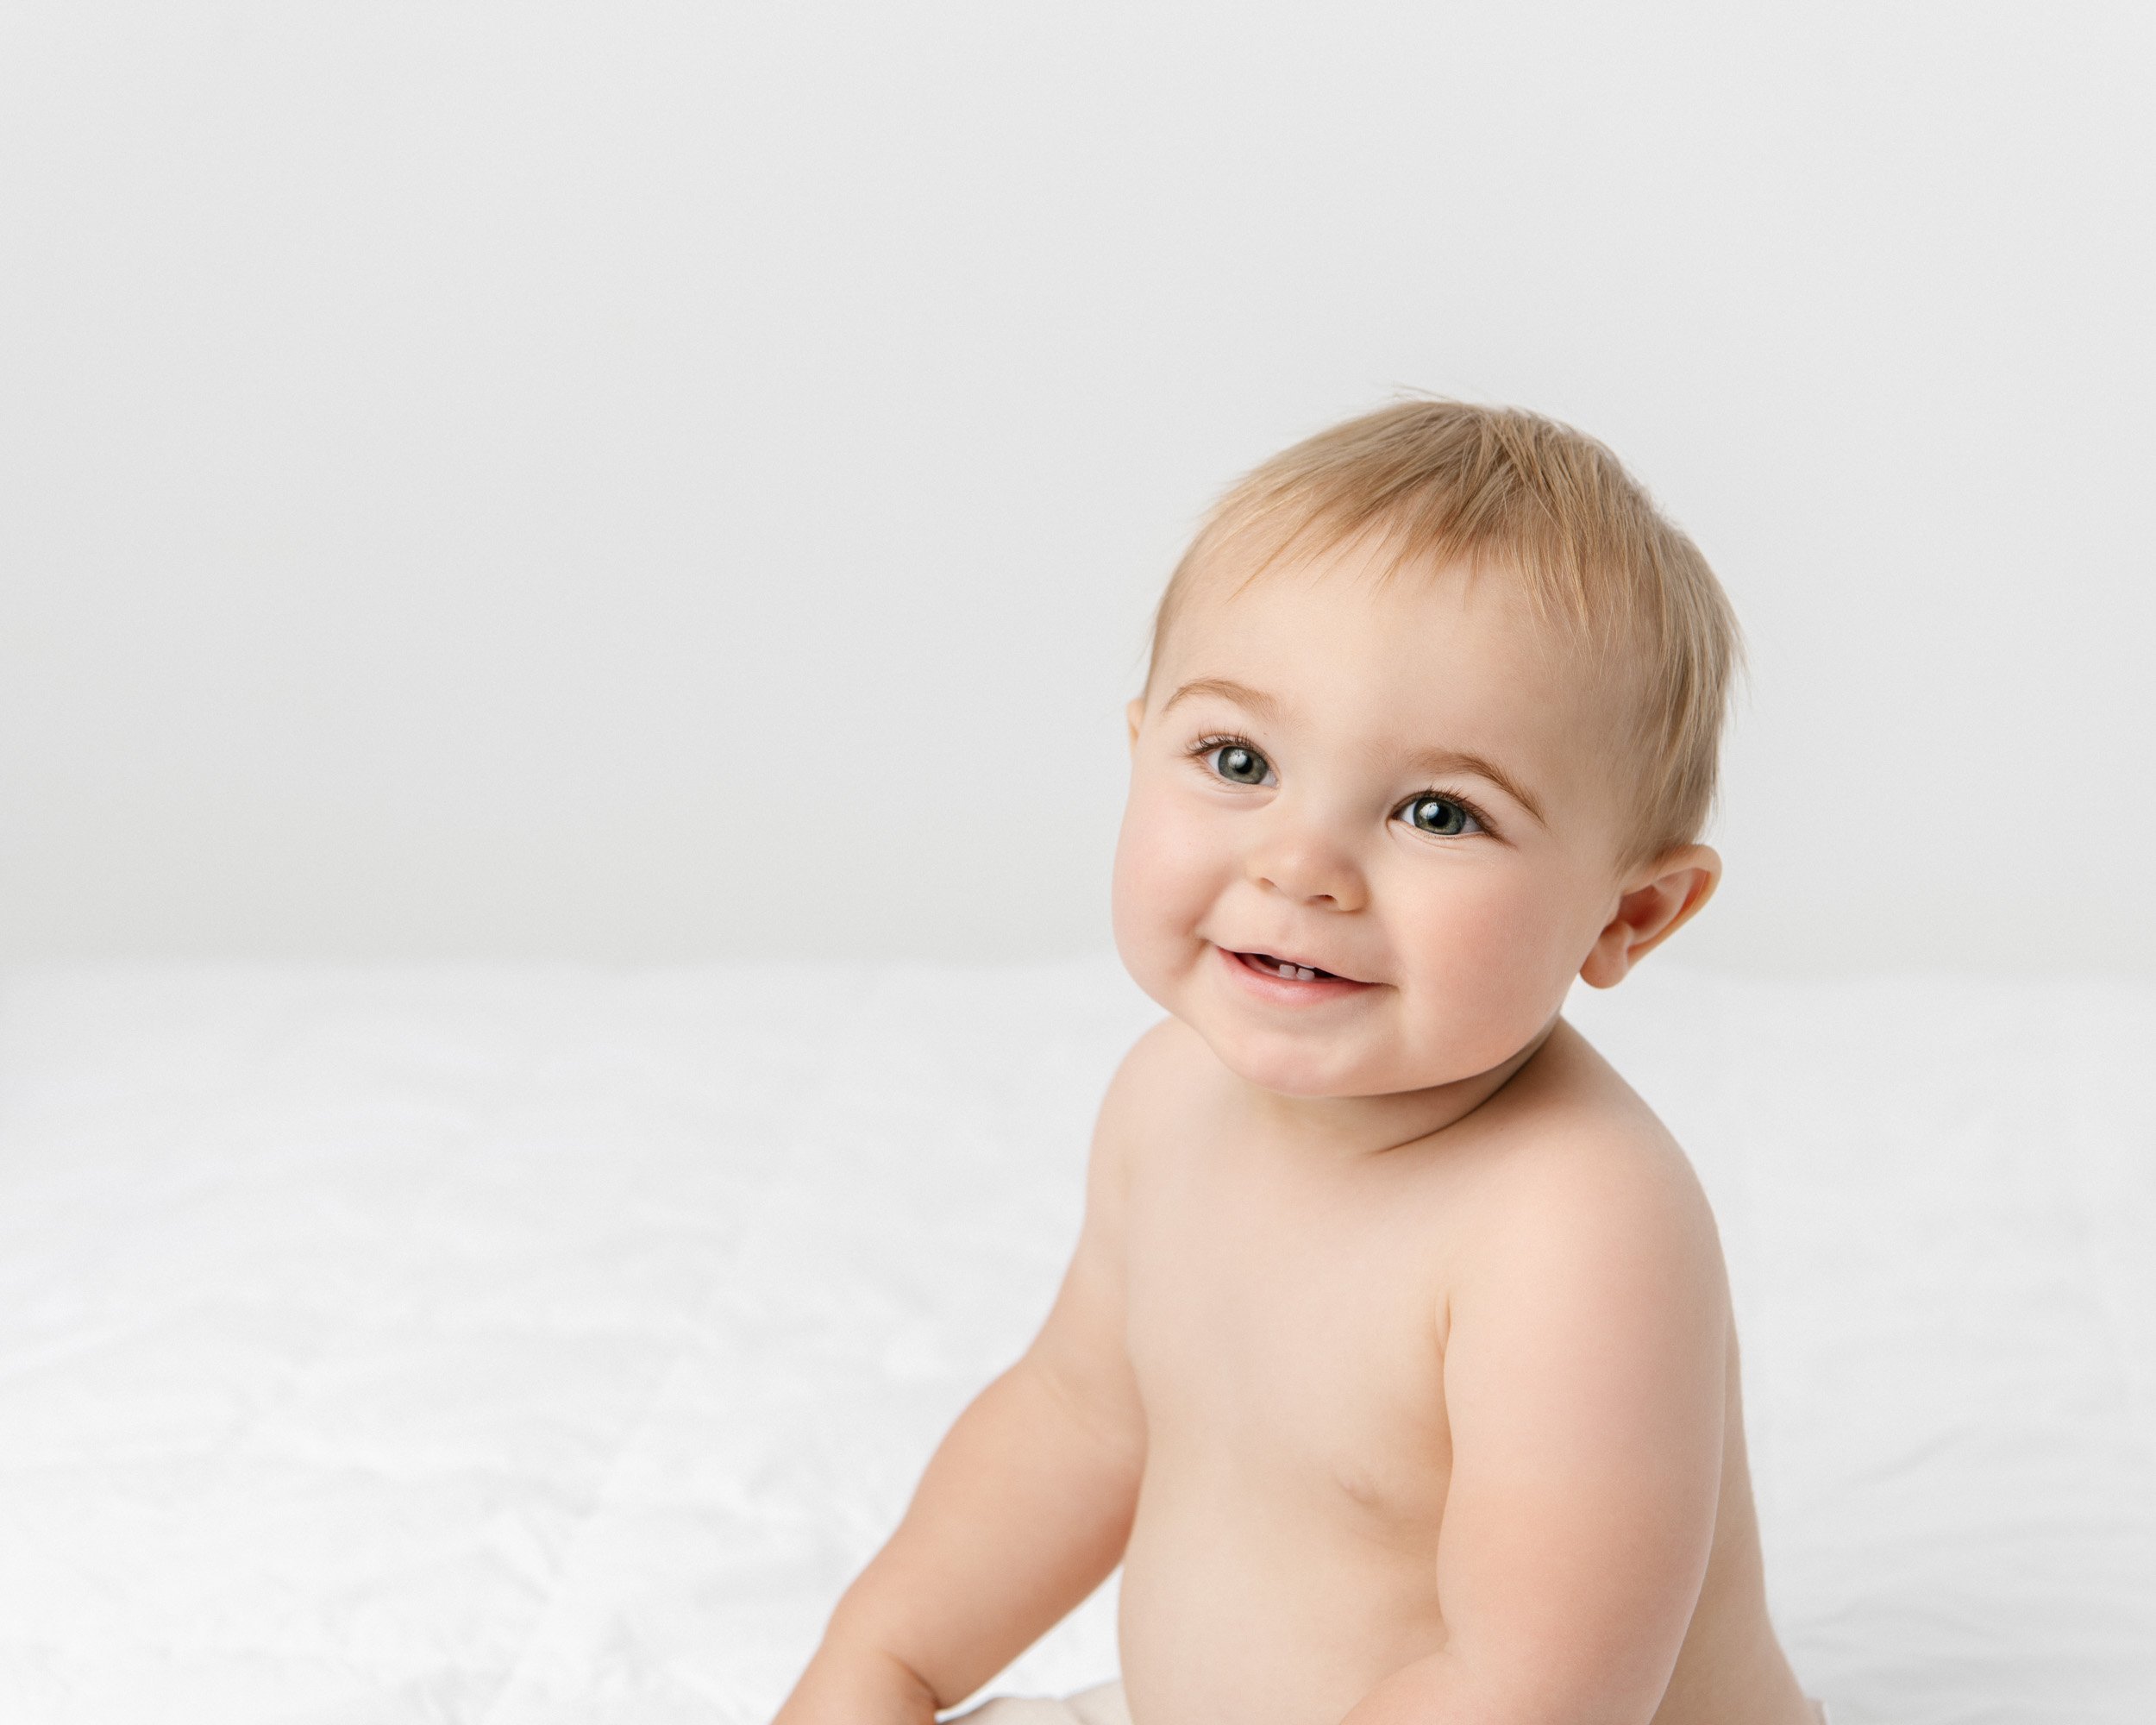  New Jersey child studio photographer captures a one-year-old without a shirt by Nicole Hawkins Photography. studio birthday #NicoleHawkinsPhotography #NicoleHawkinsBabies #BirthdayStudioPhotography #smashcake #firstbirthday #studiobabiesandchildren 